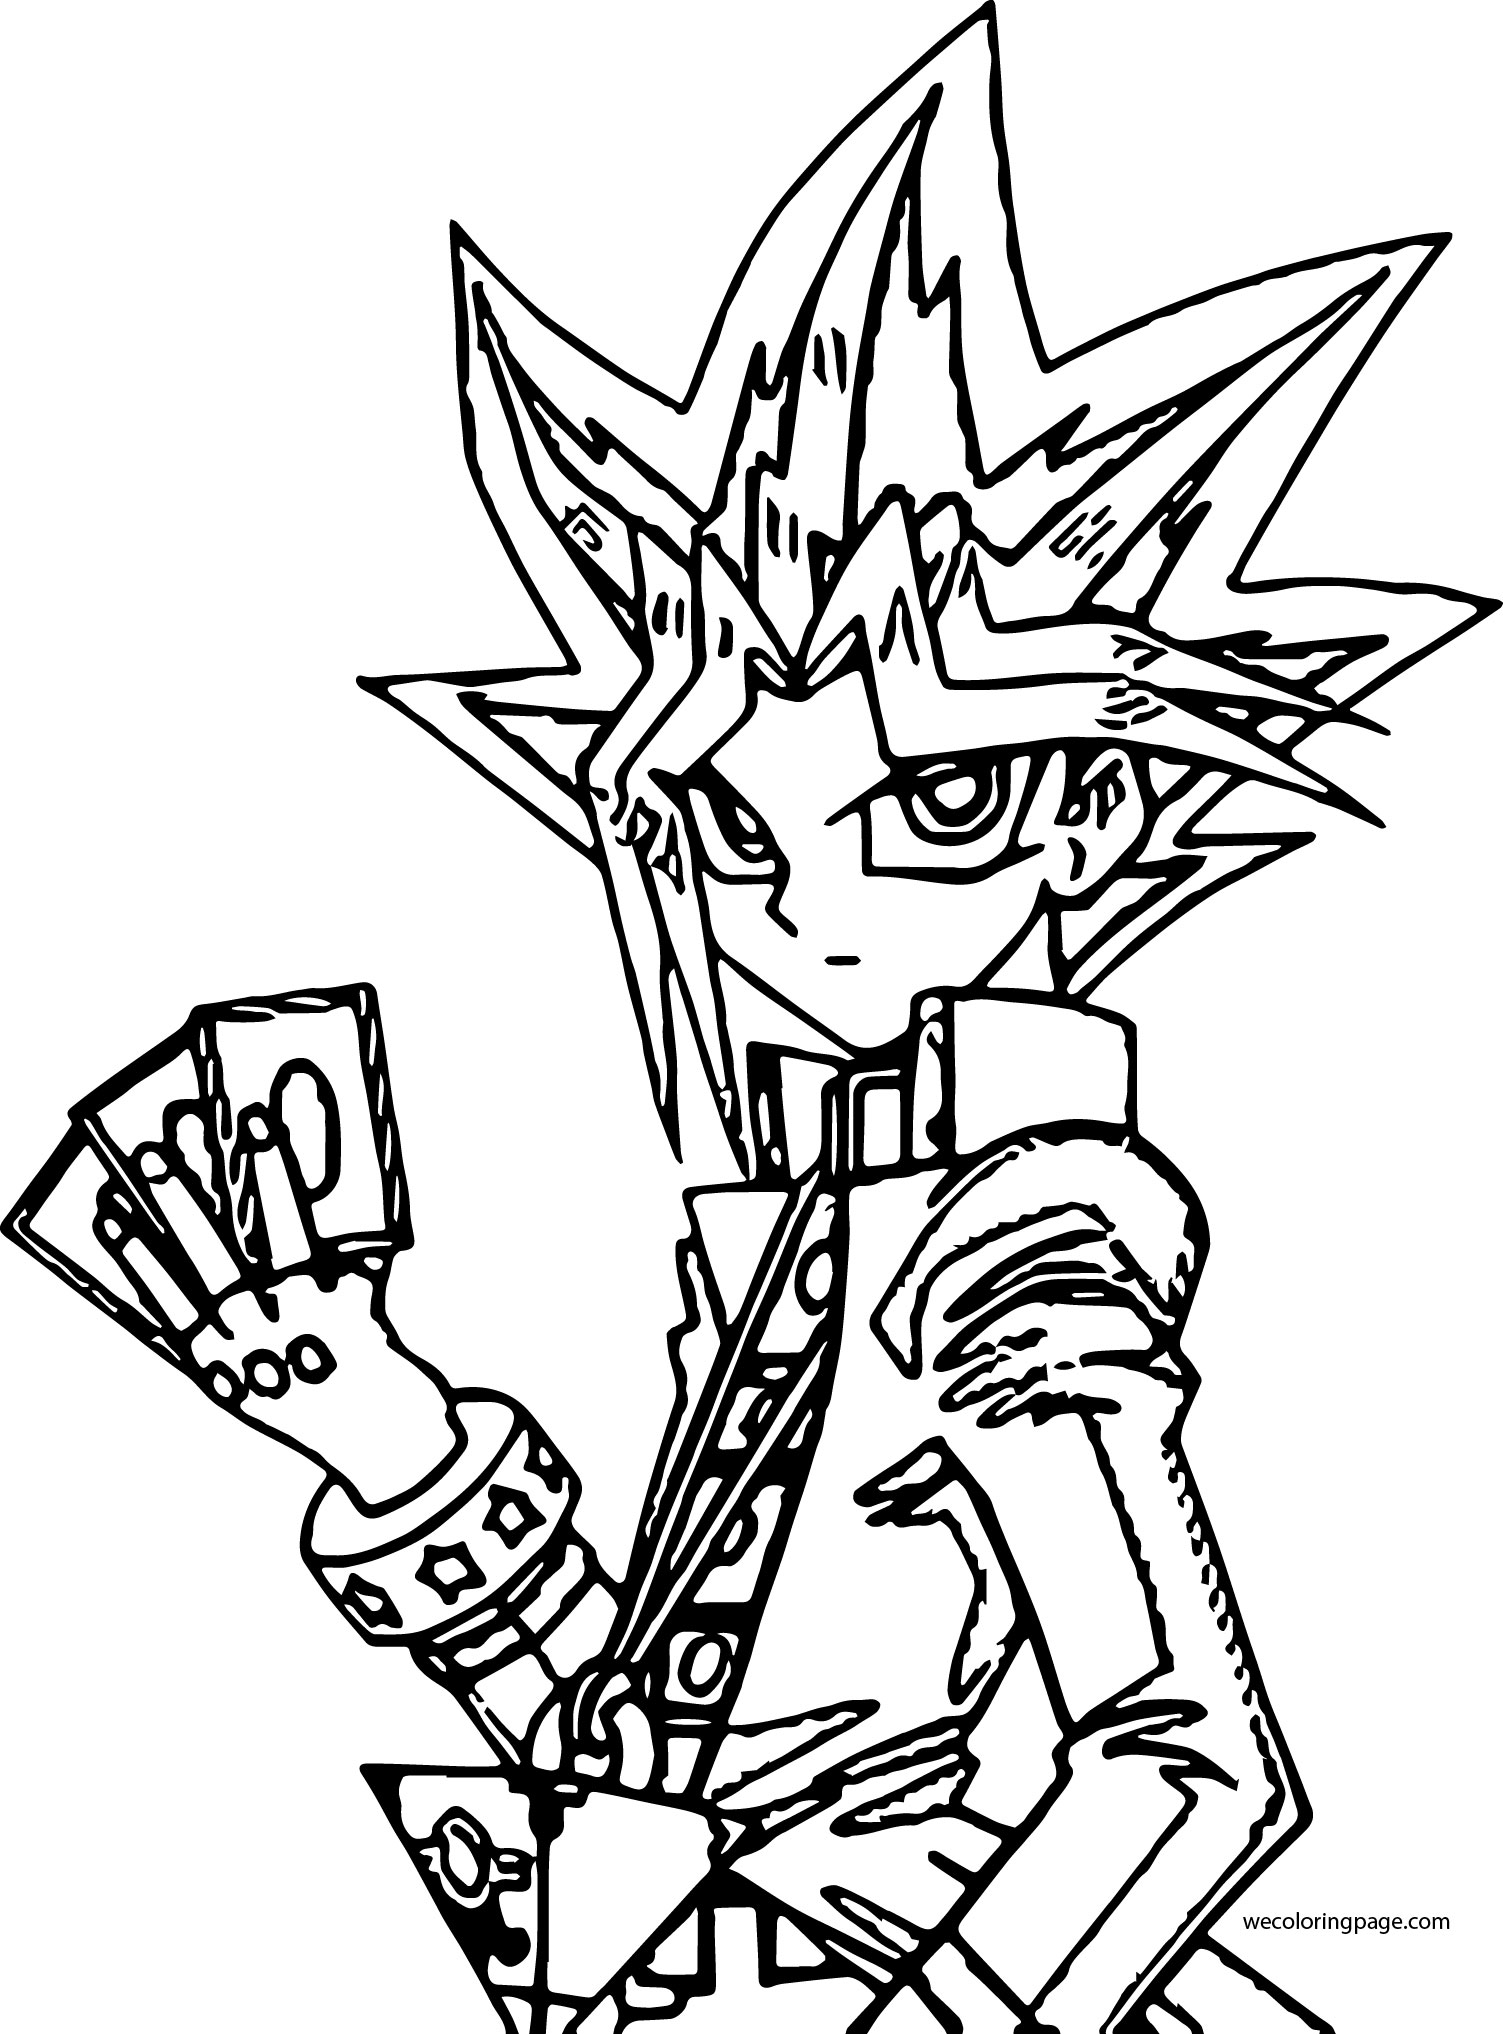 Yugioh Coloring Pages | Free download on ClipArtMag